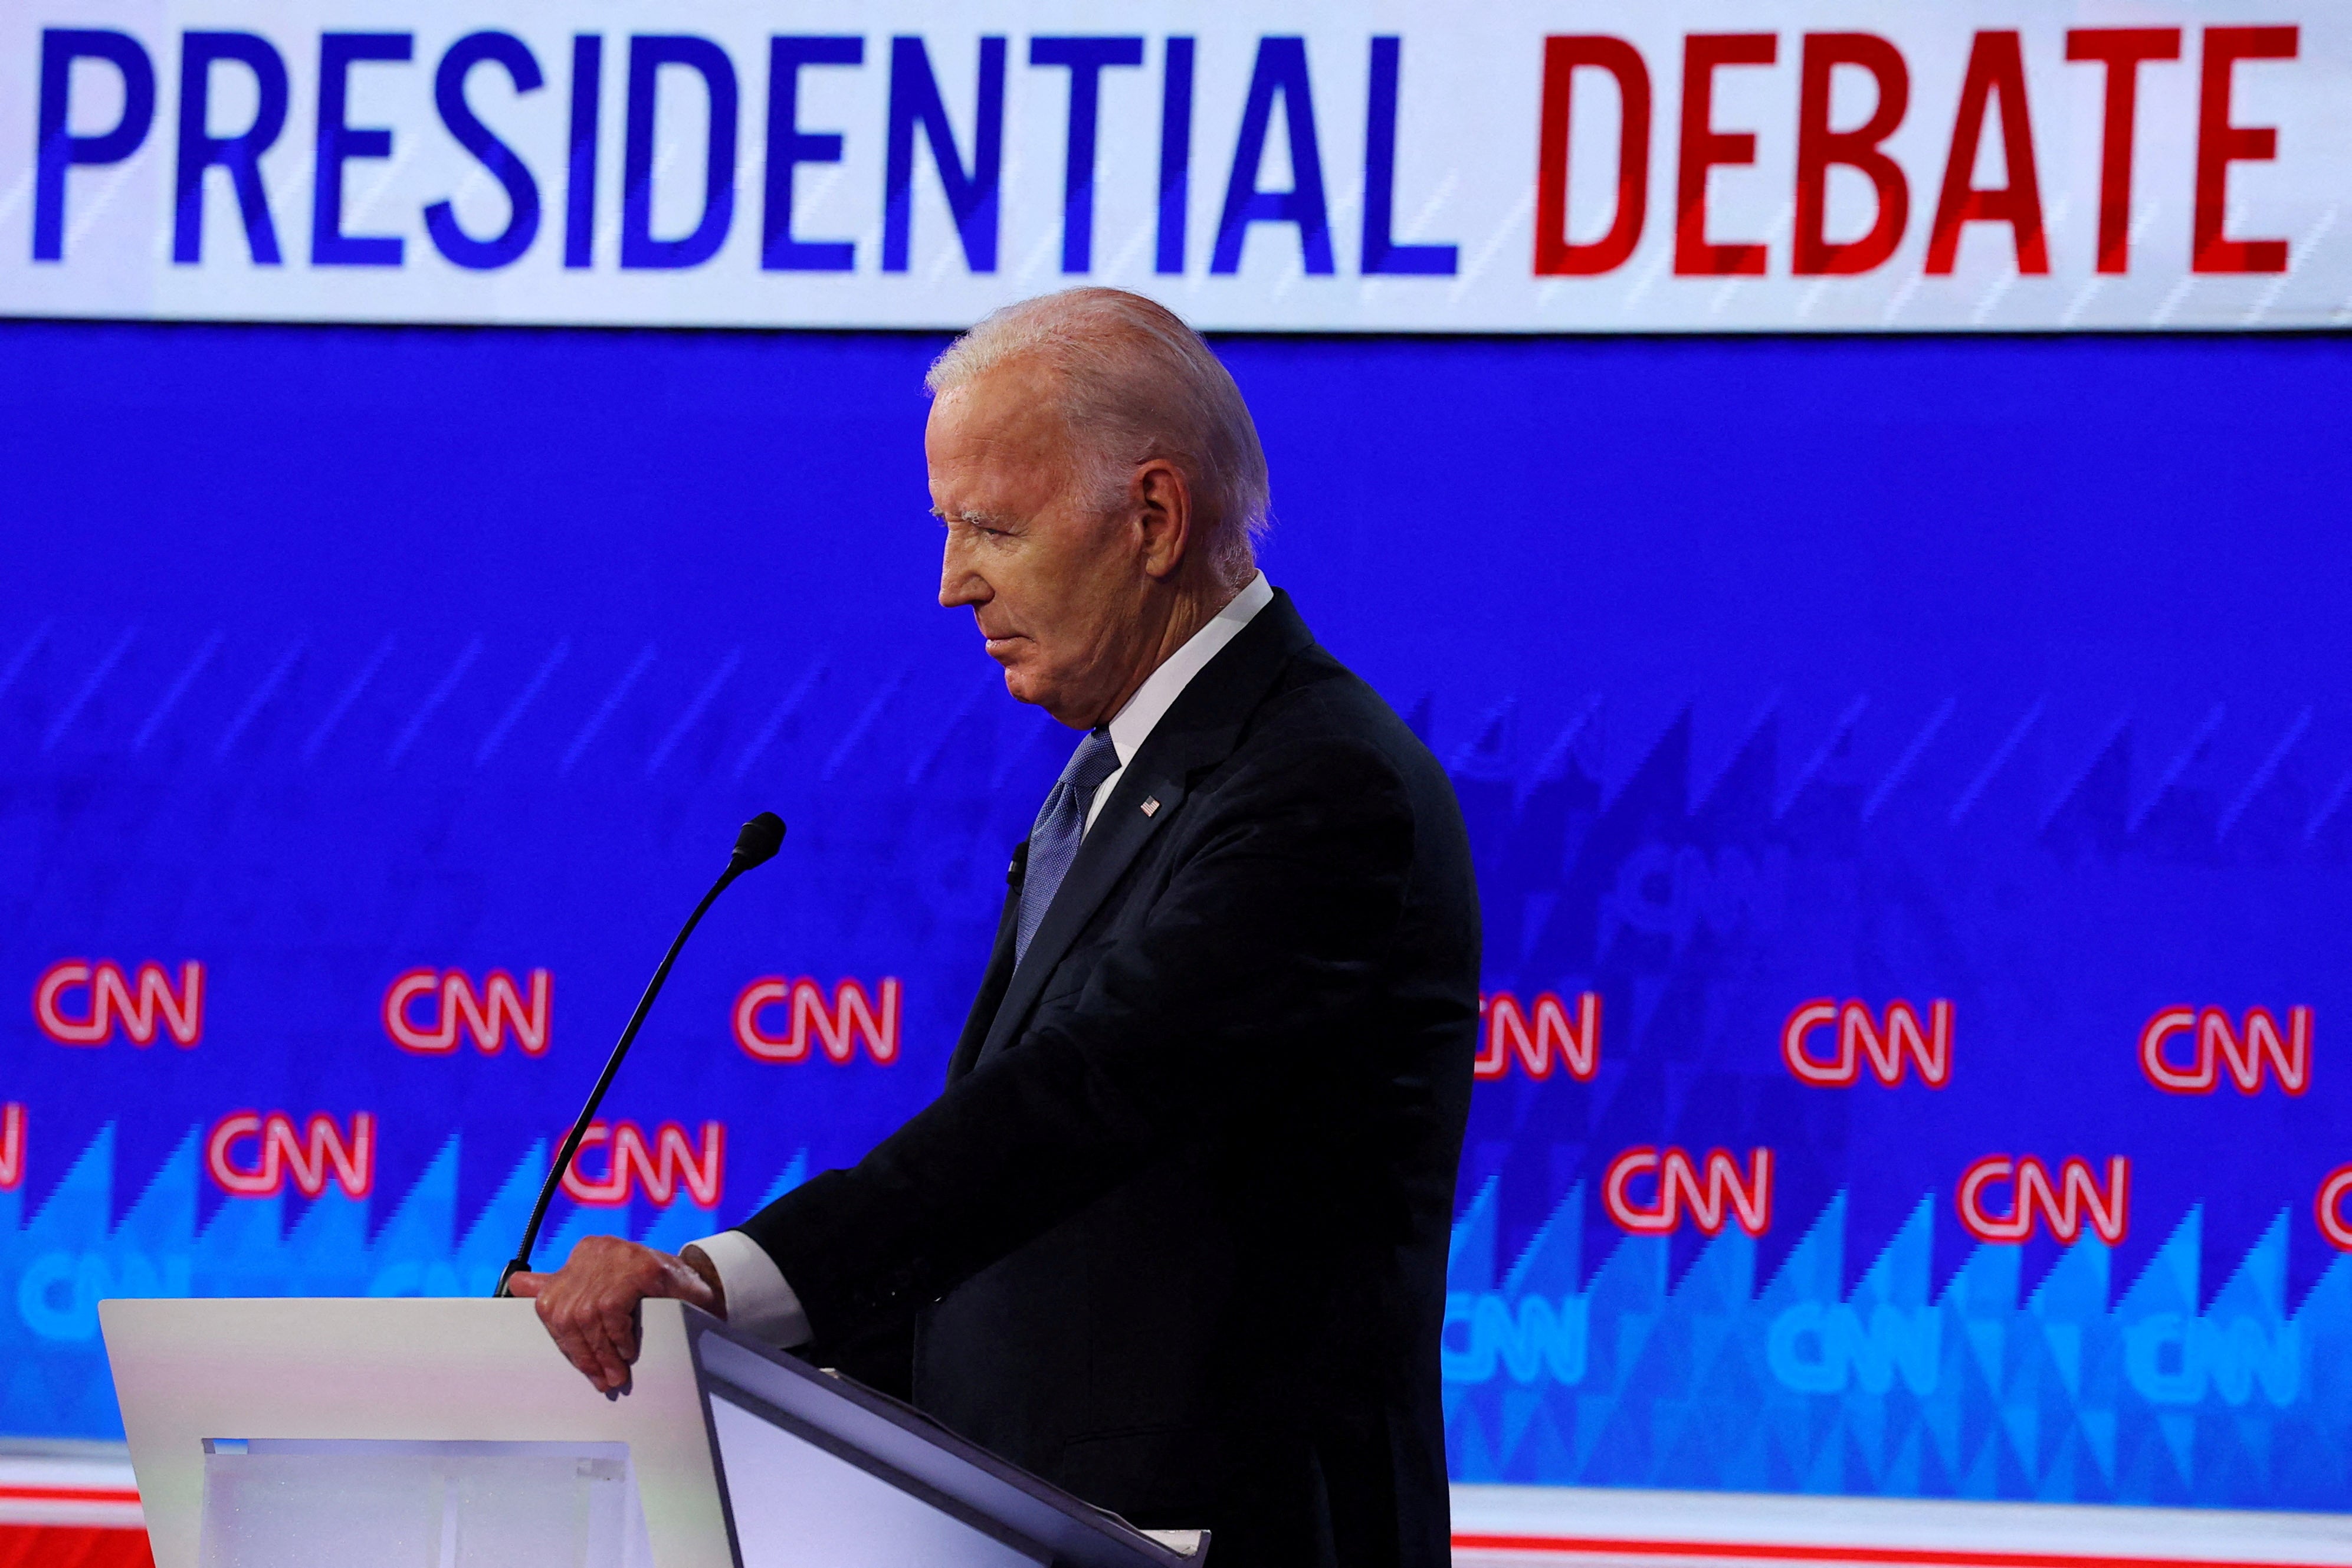 In remarks shared by pool reporters who attended a private fundraiser in Virginia on Tuesday, Biden said he “wasn’t very smart” for “traveling around the world a couple times” before the debate